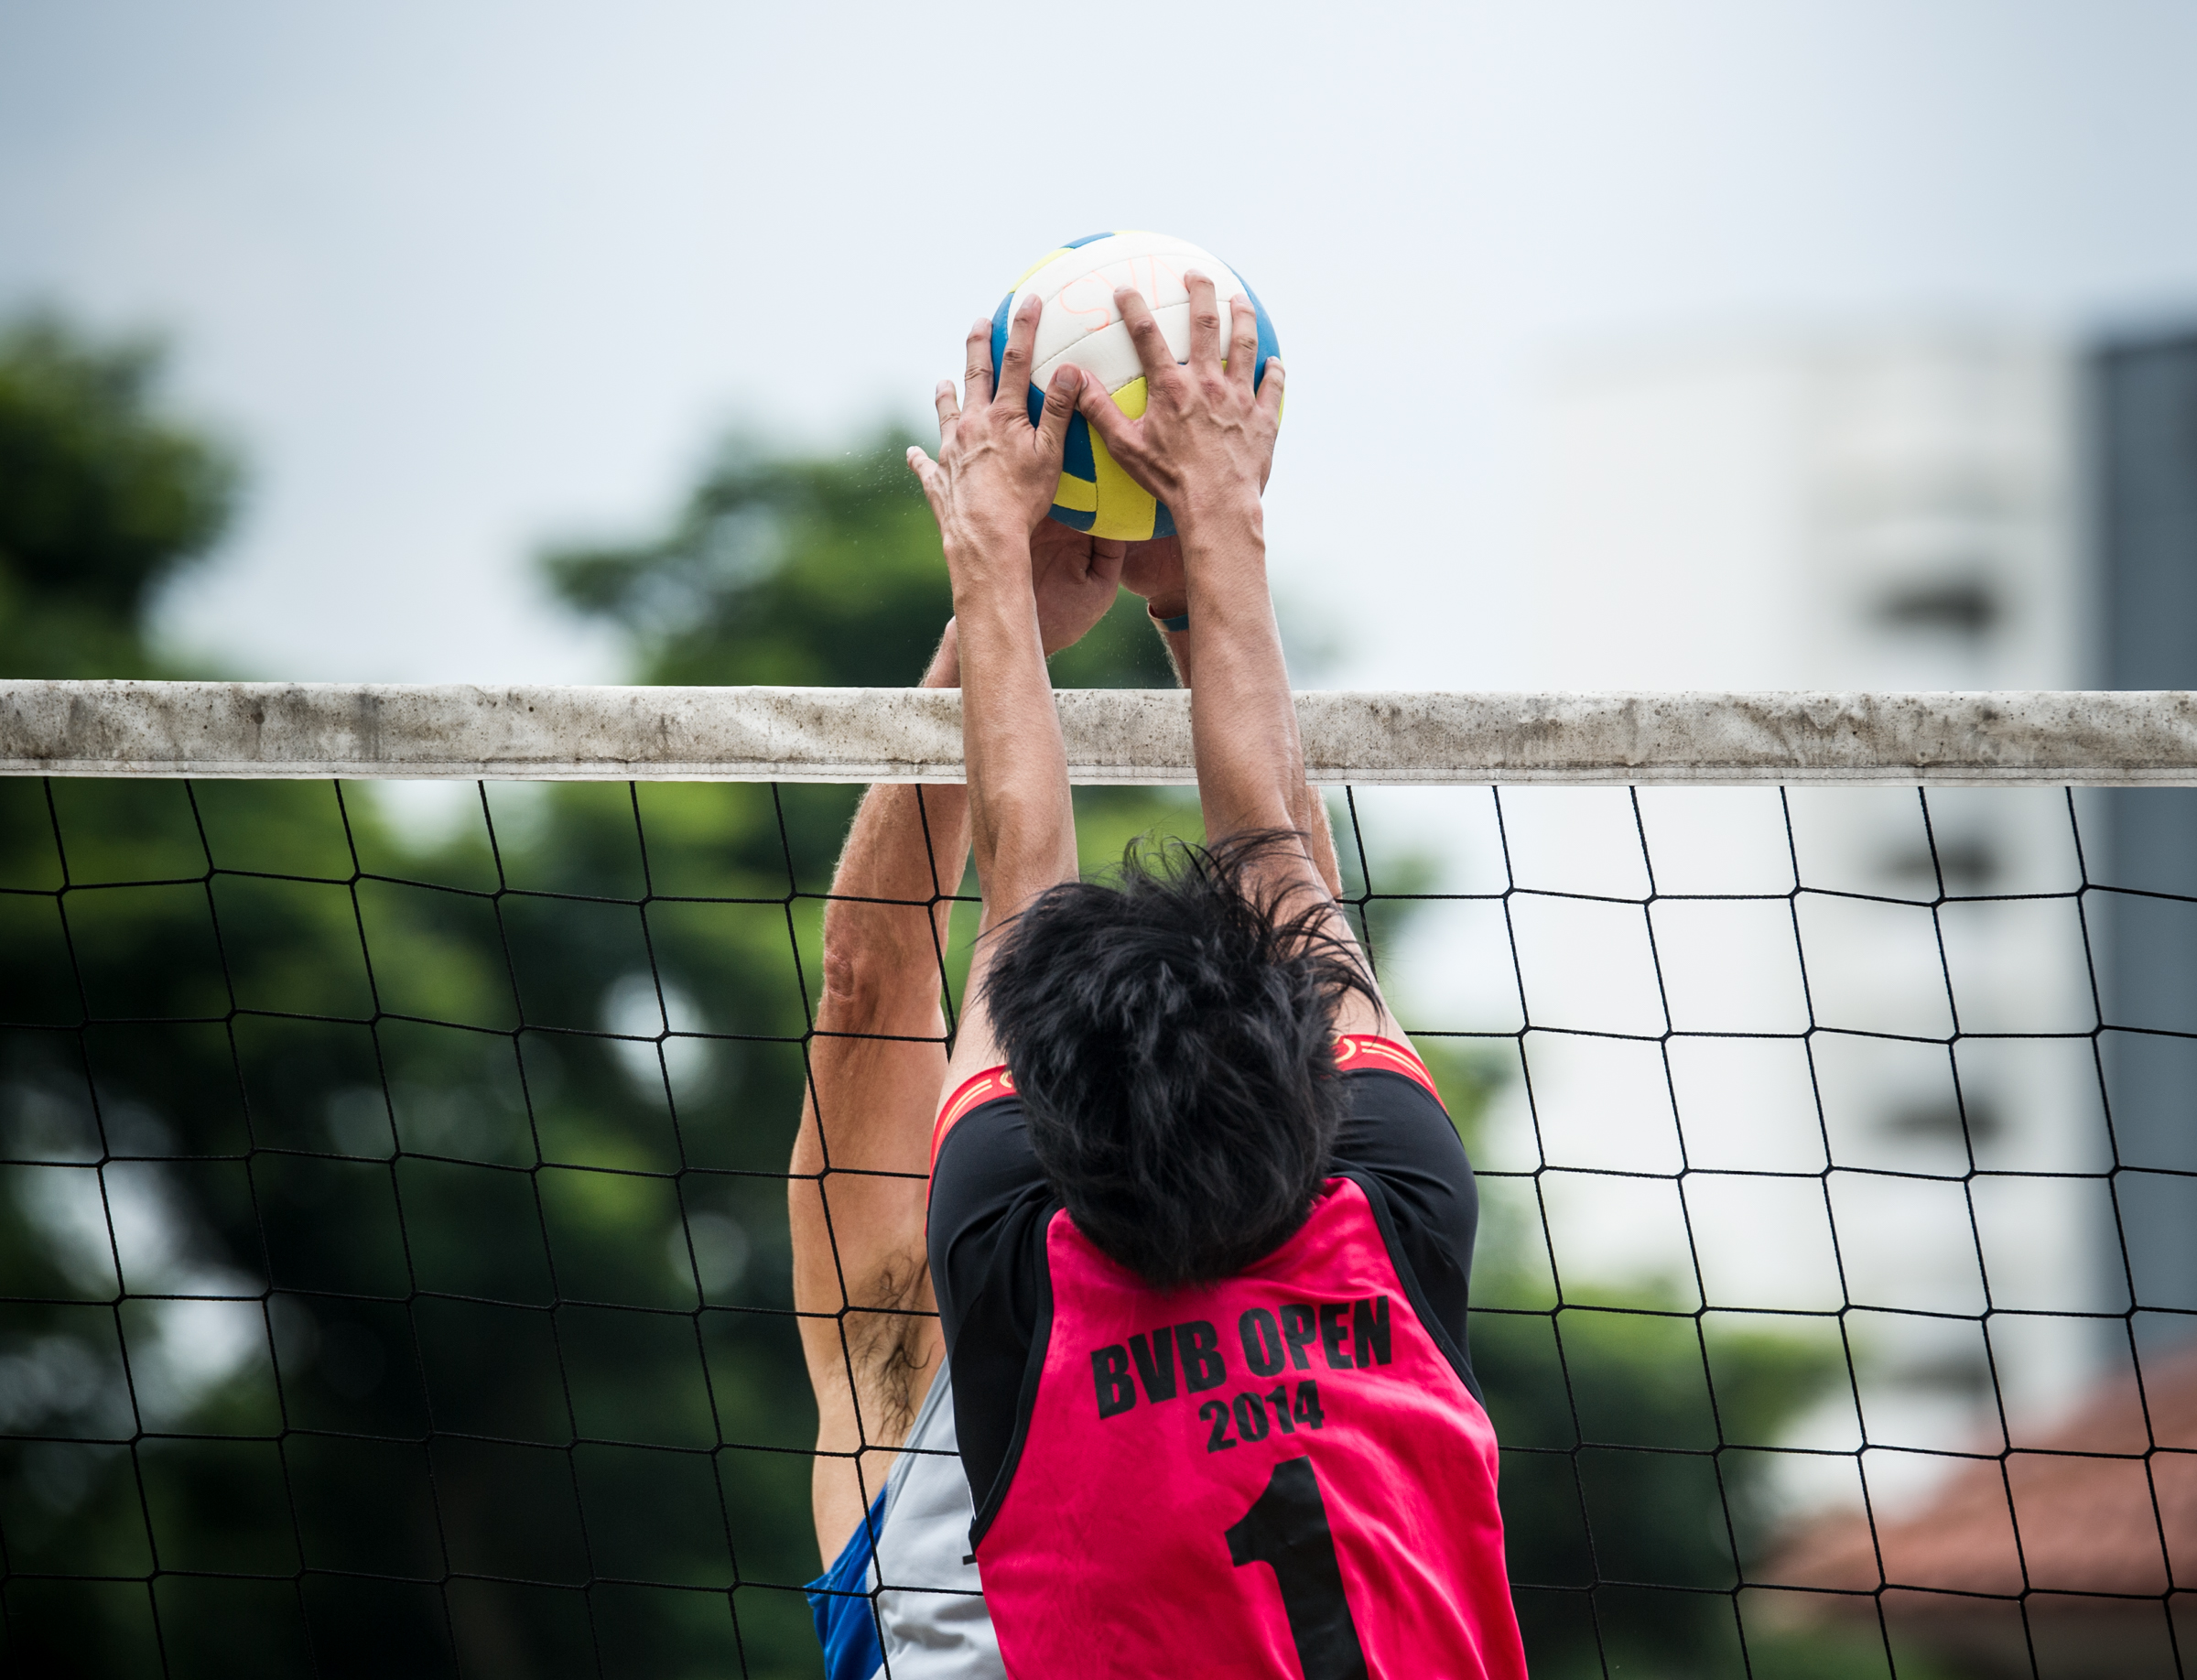 A Hong Kong player prepares to block a spike during the Beach Volleyball National Series at the Yio Chu Kang Swimming Complex.